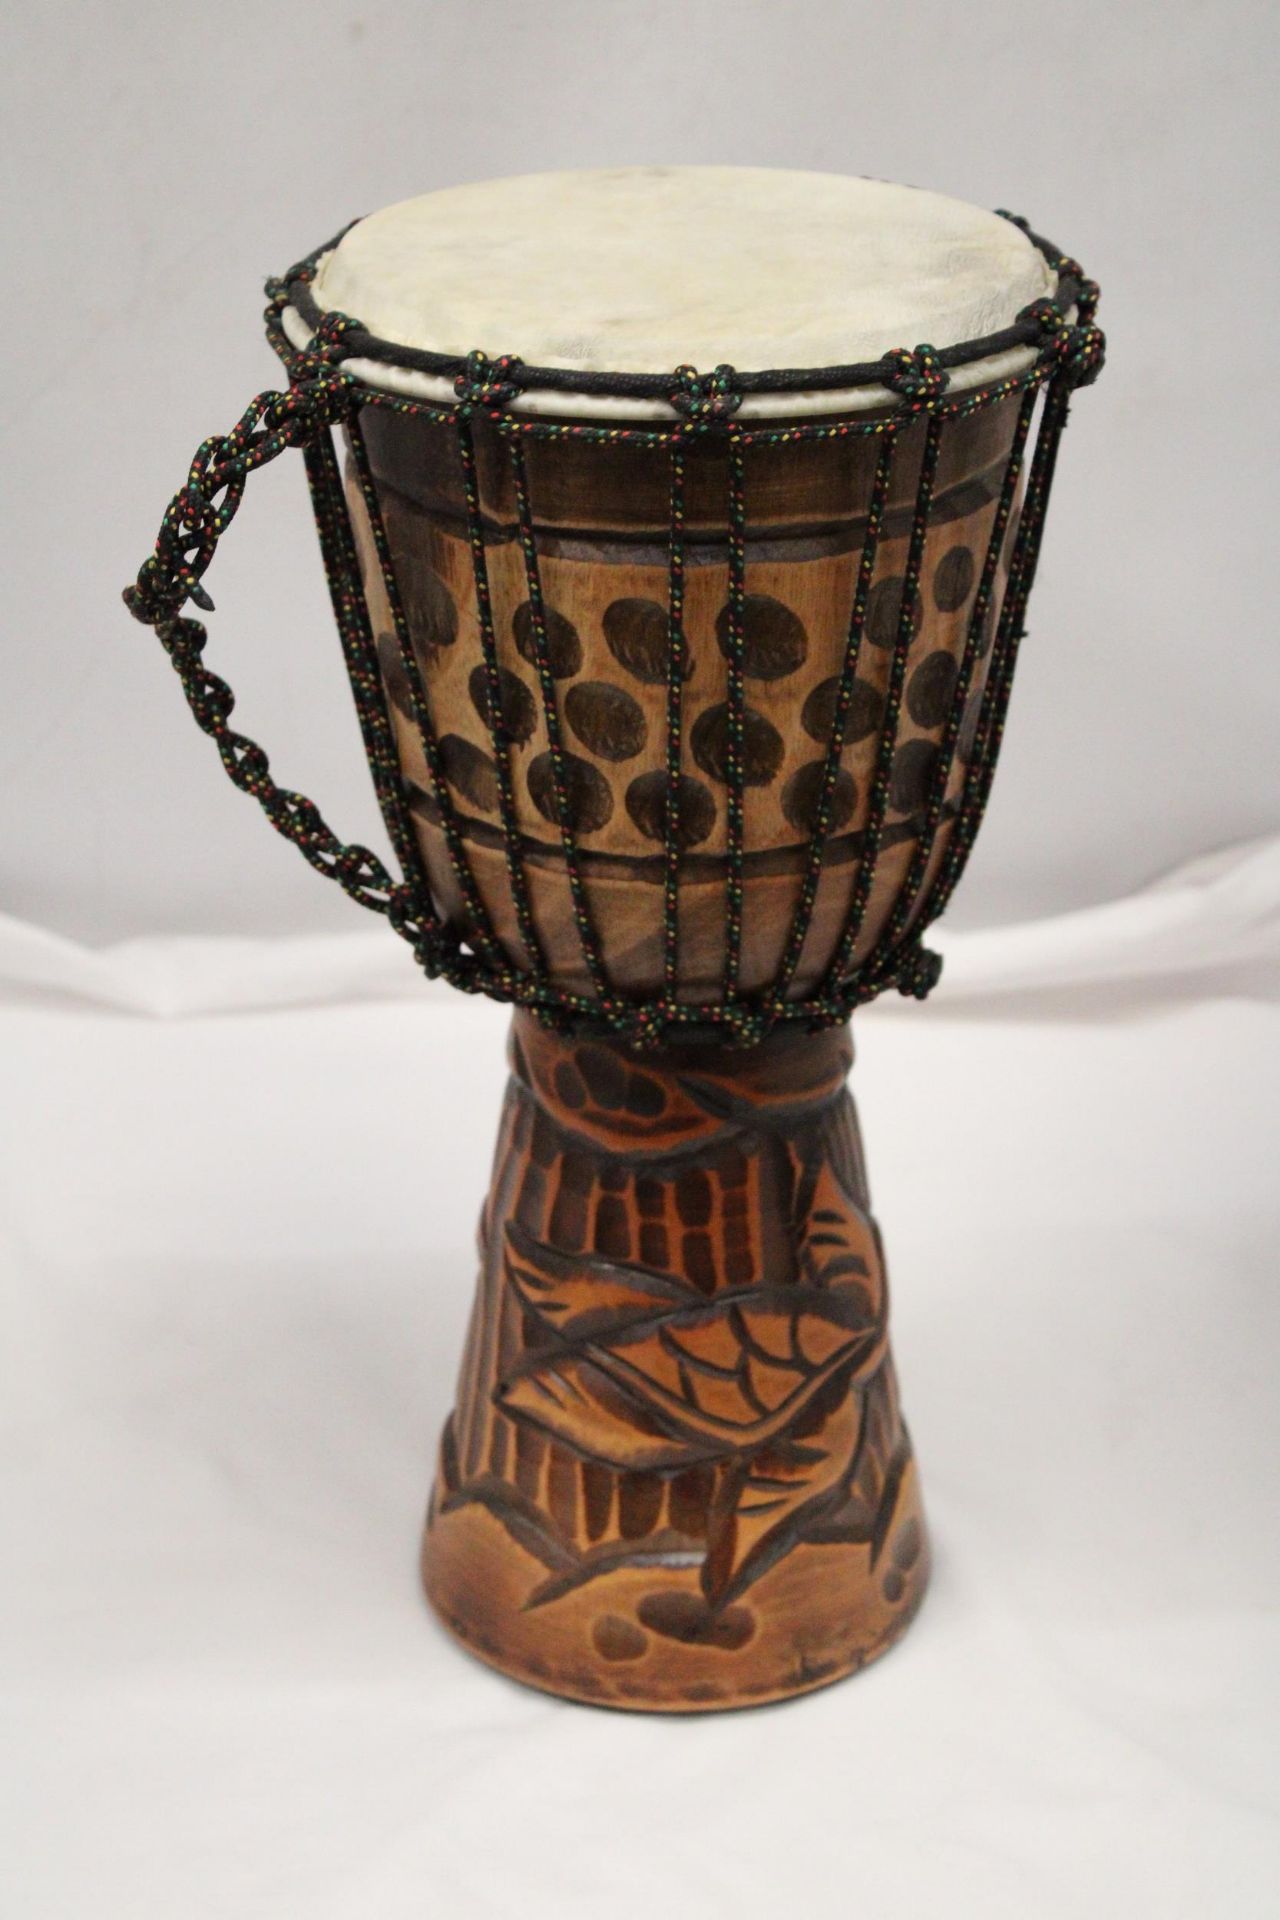 A WOODEN HAND CARVED BONGO DRUM APPROXIMATELY 40CM HIGH - Image 2 of 4